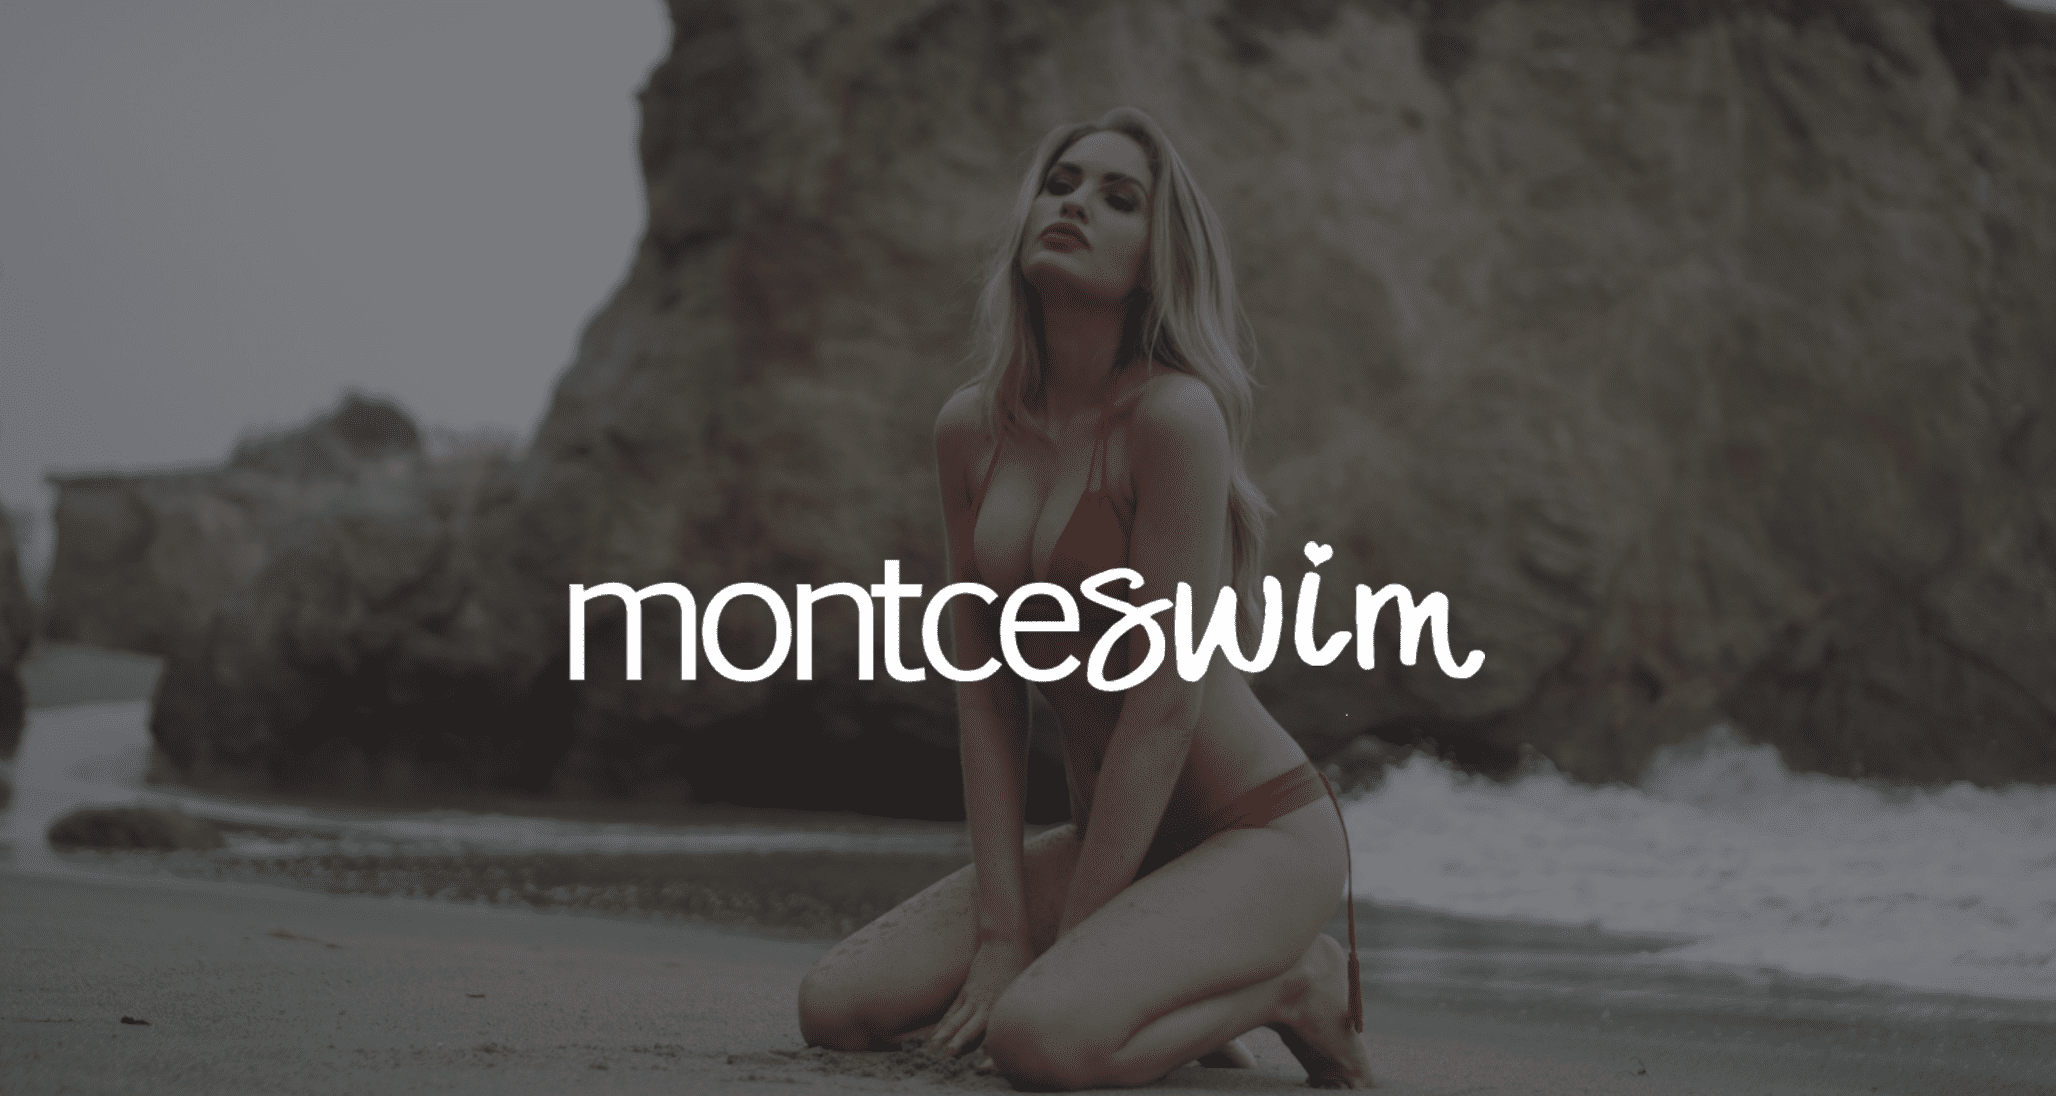 Professional Video Production Services by C&I Studios White montceswim logo against a dim background of a woman with long blond hair in a bikini kneeling in the sand posing for the camera